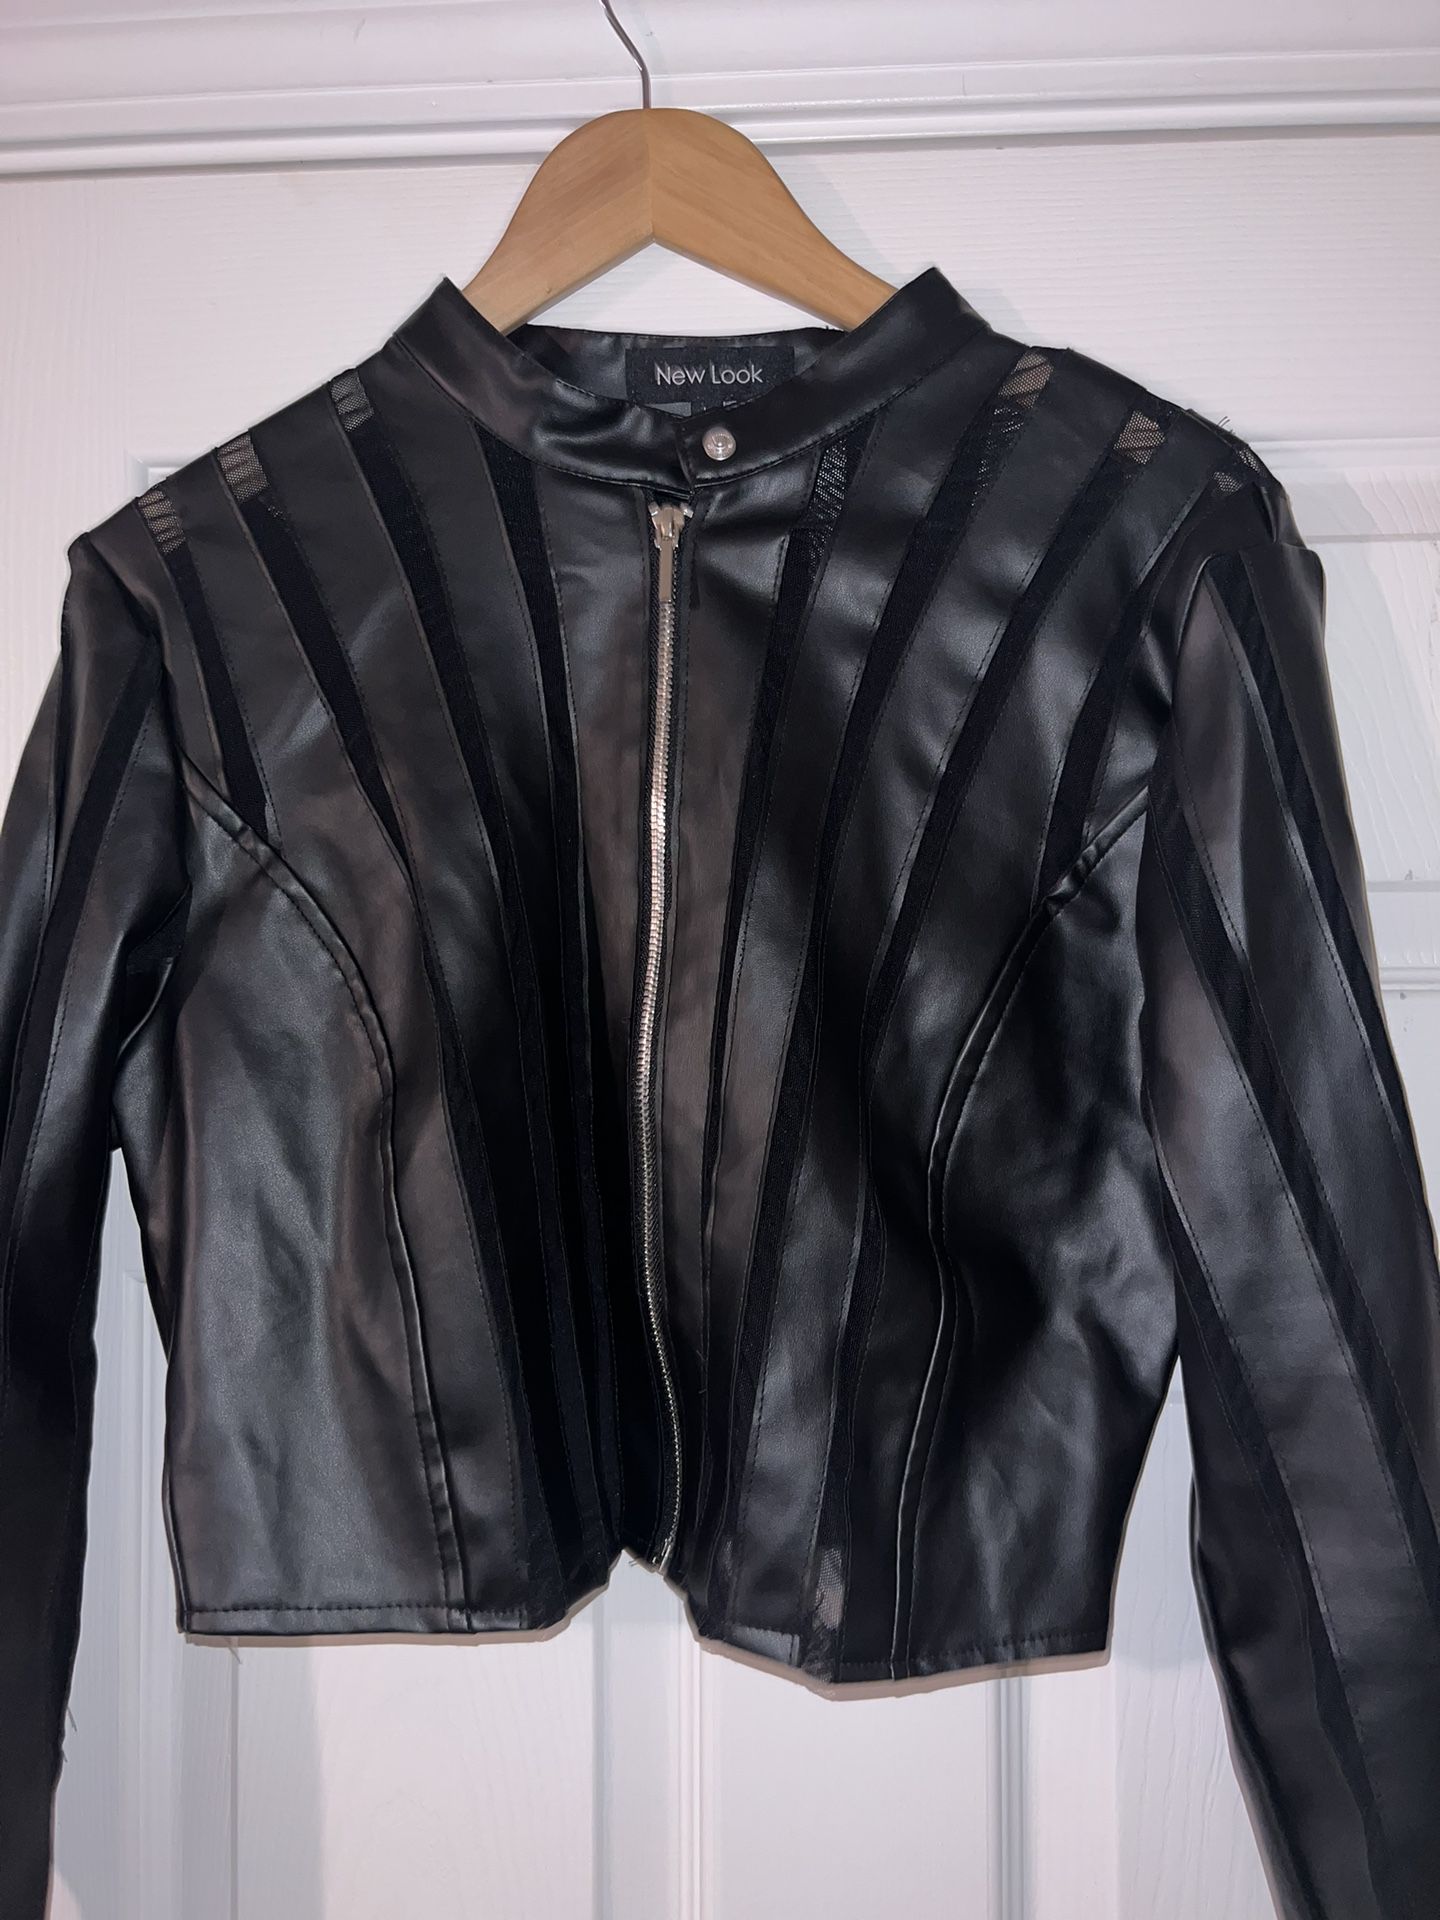 NEW LOOK sheer faux leather striped cropped jacket size L